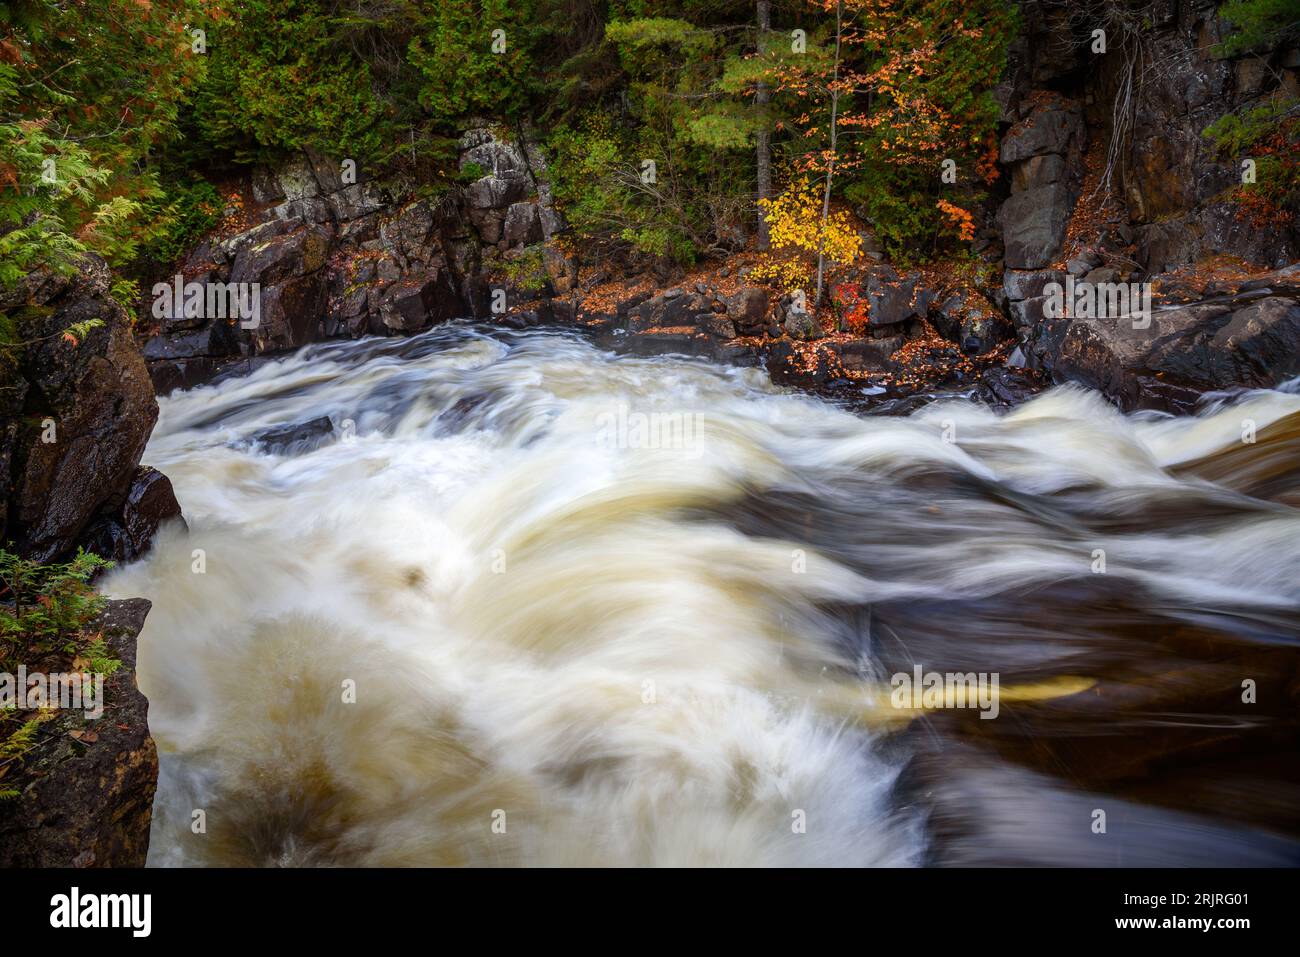 Fast flowing water at the top of a waterfall along a river running through a forest in autumn Stockfoto